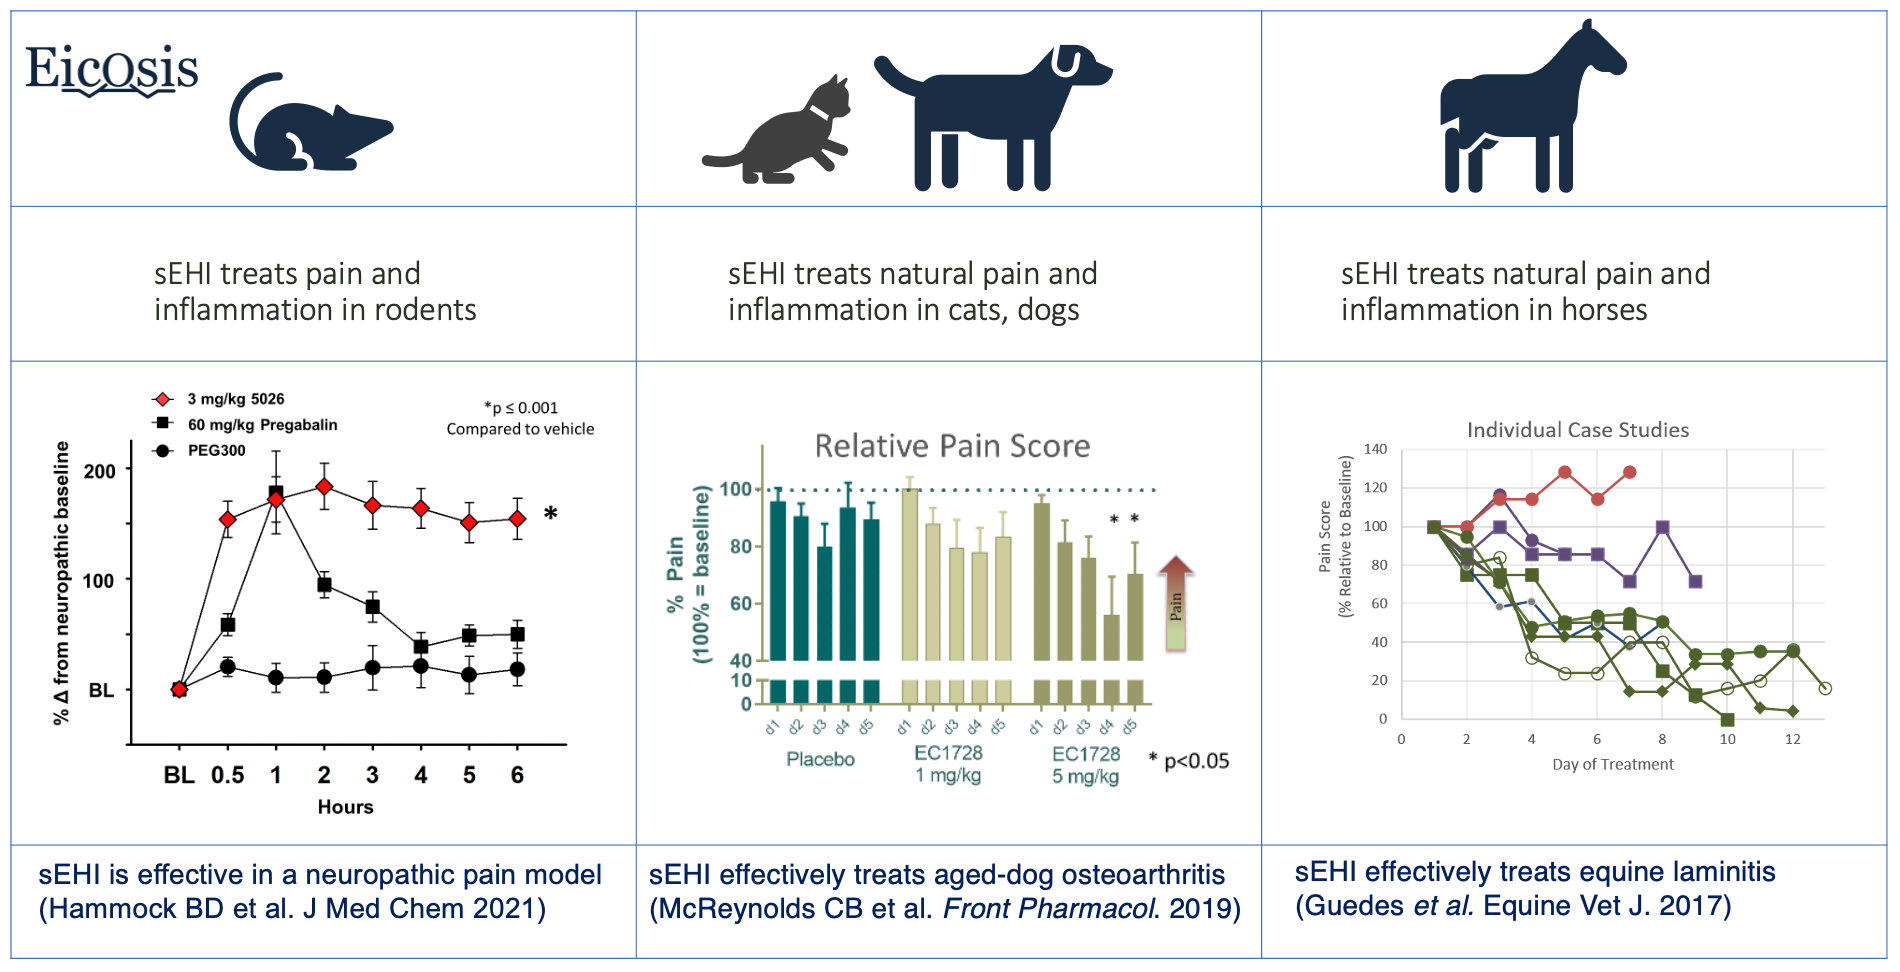 Shows how sEH inhibitors have shown efficacy in animal models, supporting translation to human pain and inflammation